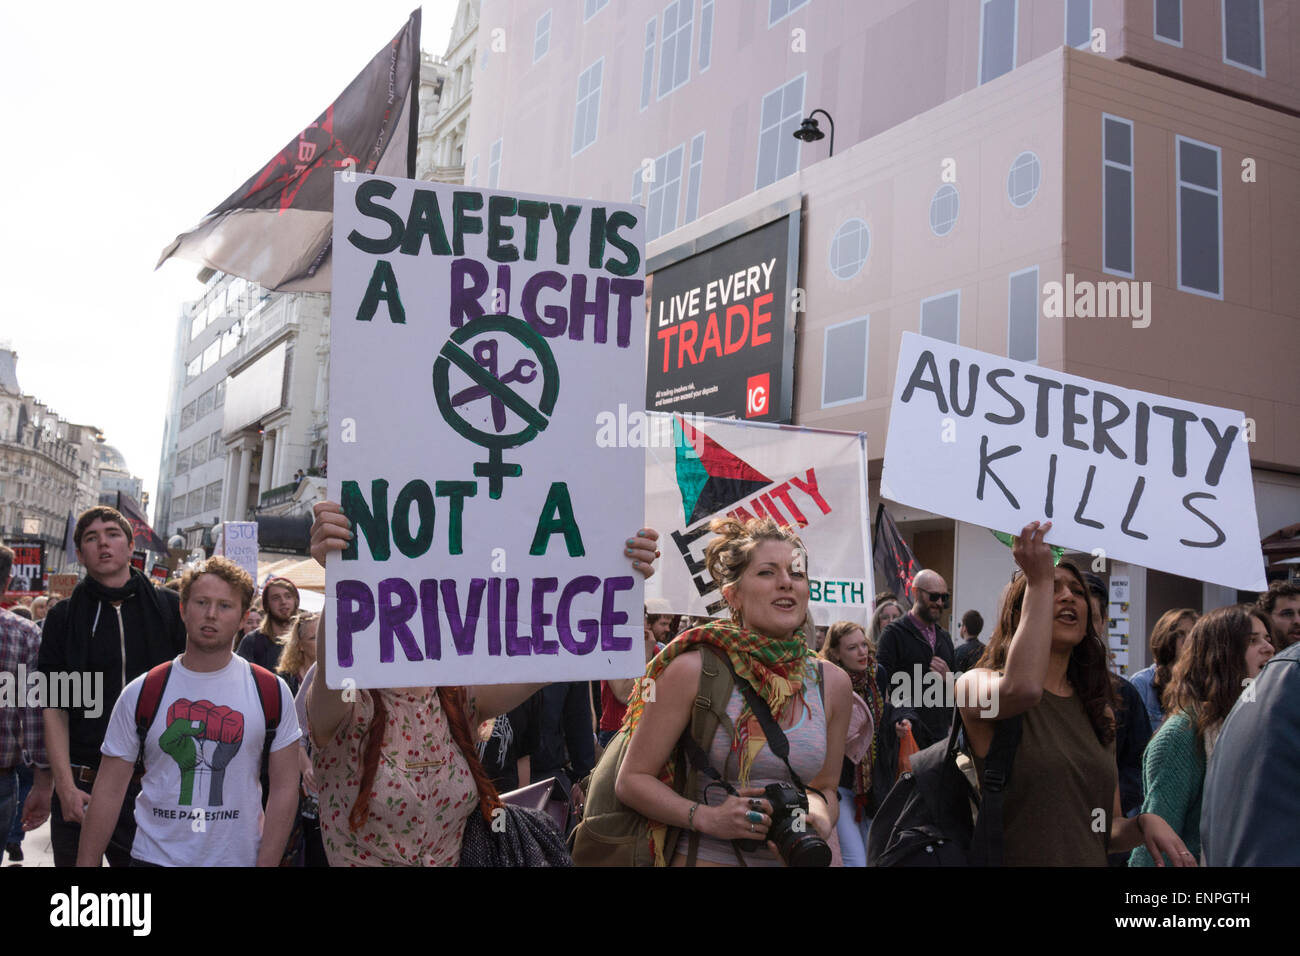 London, 9th May 2015. Protesters hold up placards which read 'Safety is a right, not a privilege' and 'Austerity kills' as a demonstration marches in central London in protest at the 7th May 2015 general election result, which saw the conservatives win a majority. Credit:  Patricia Phillips/Alamy Live News Stock Photo